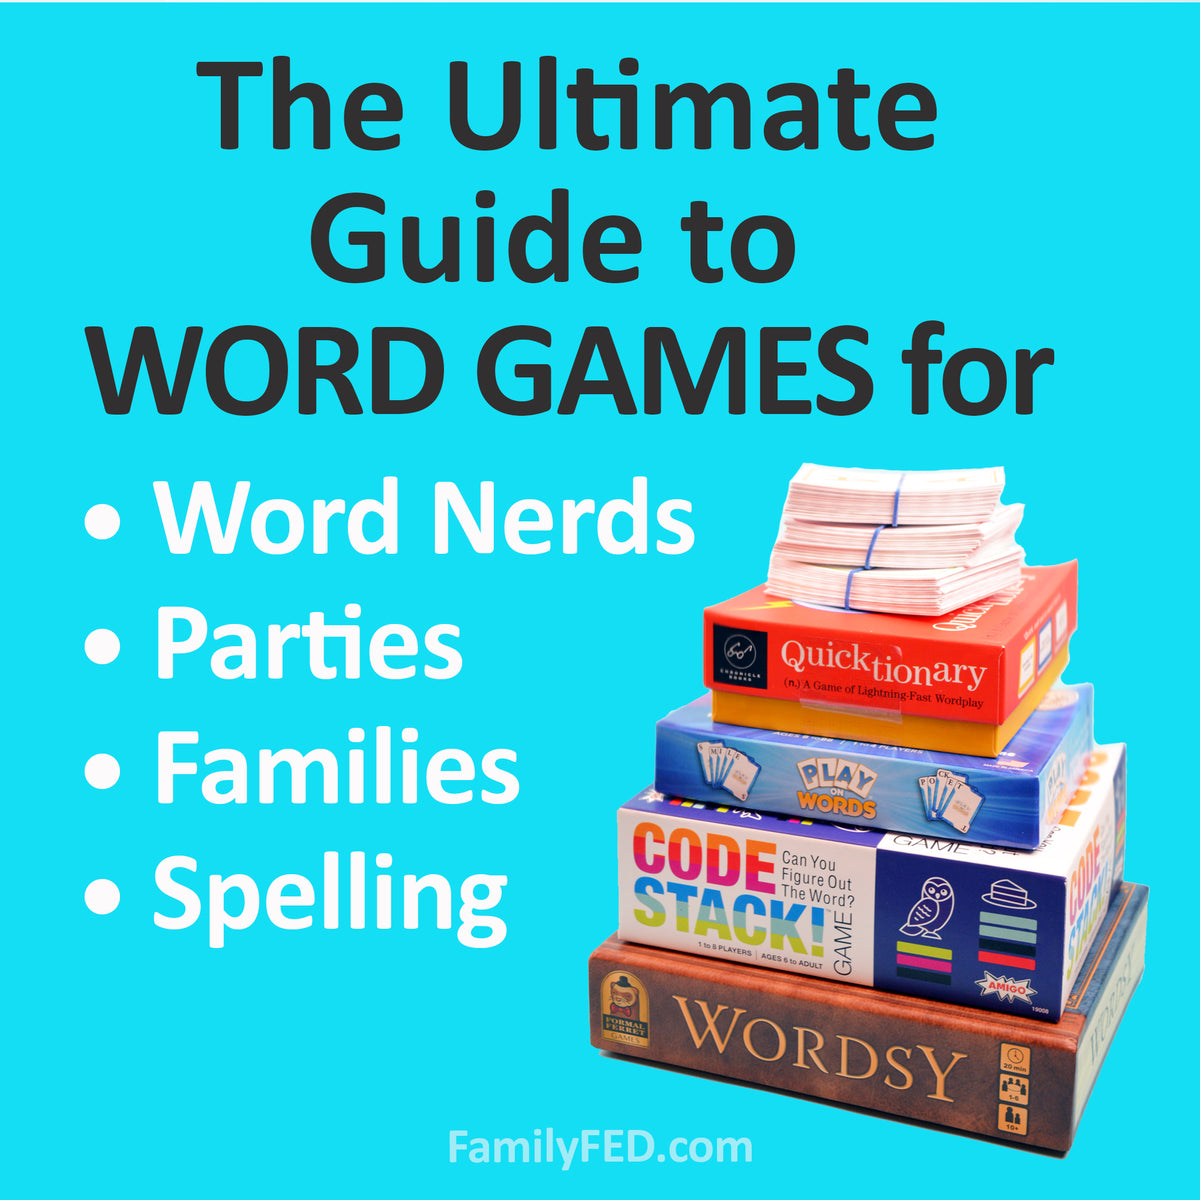 Play Categories, a fun creative-juicy word game (and you could win